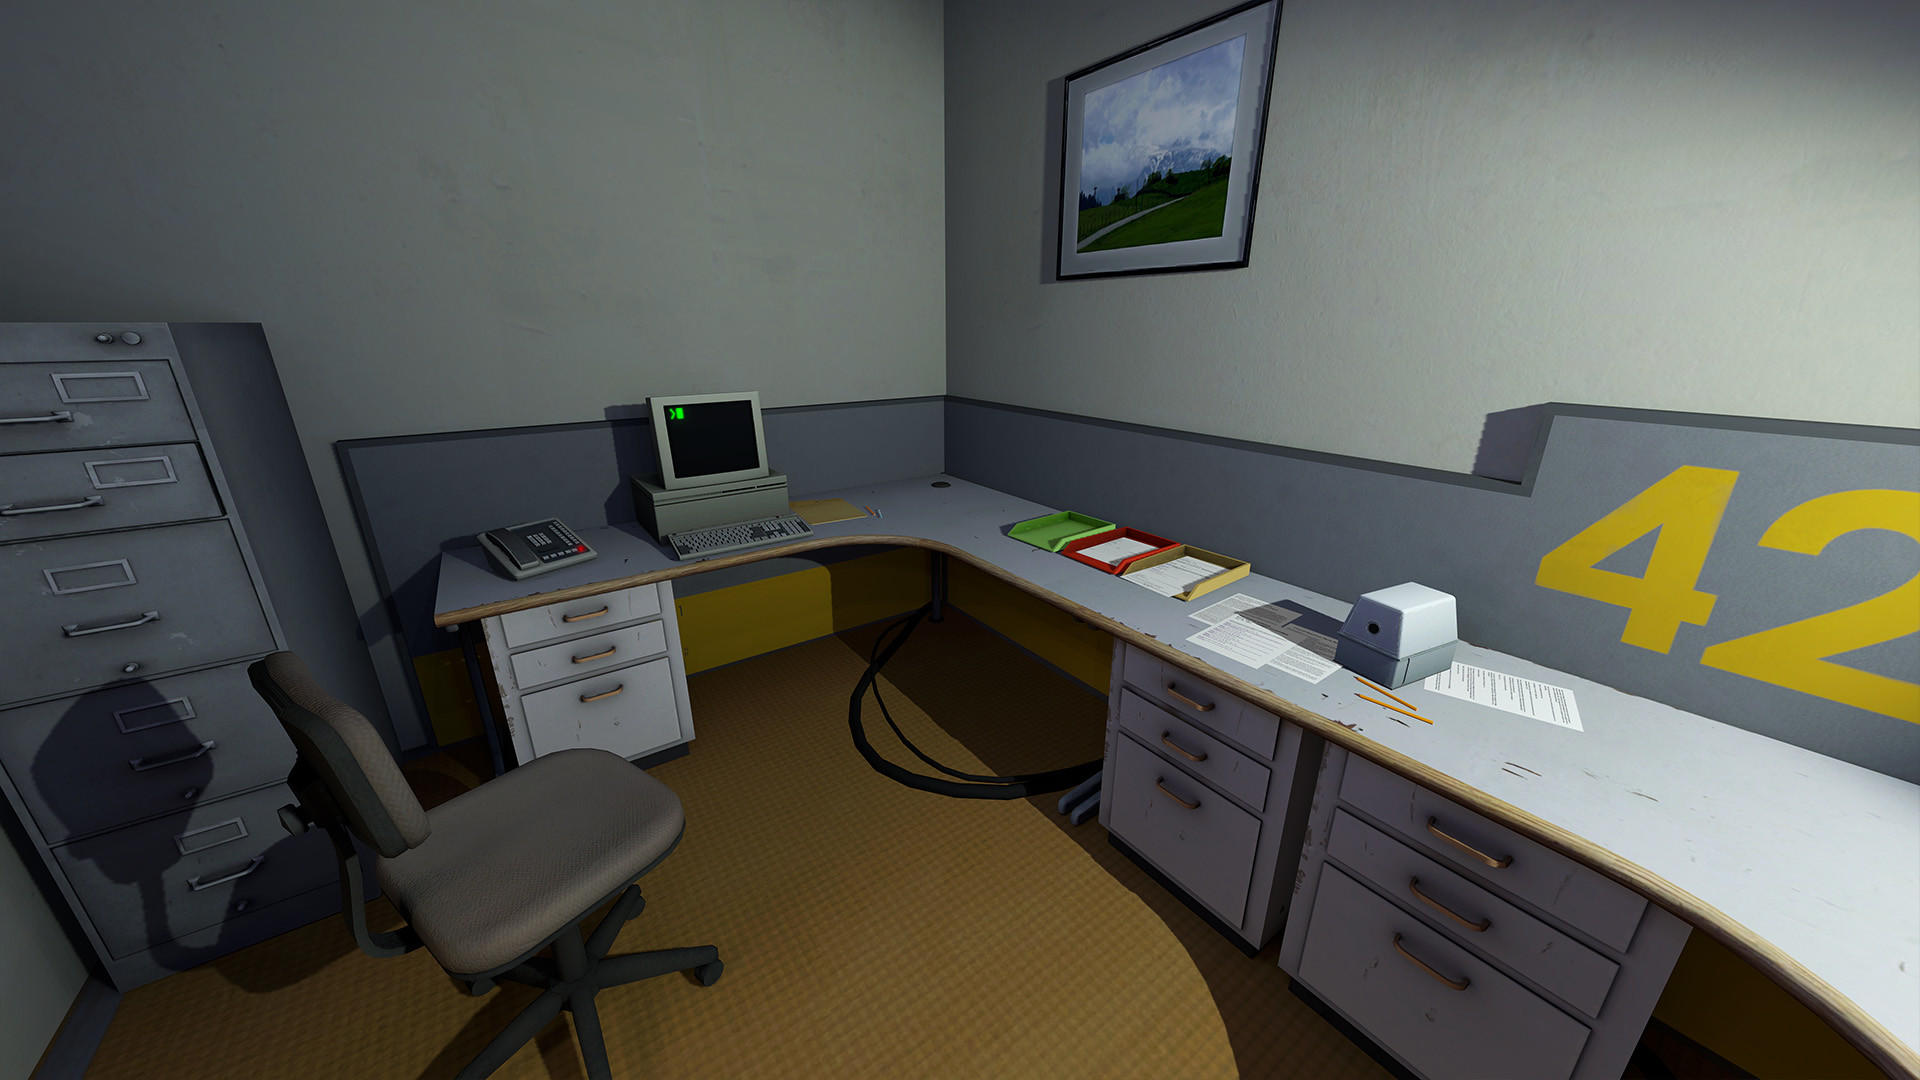 The Stanley Parable: Ultra Deluxe 게임 스크린 샷